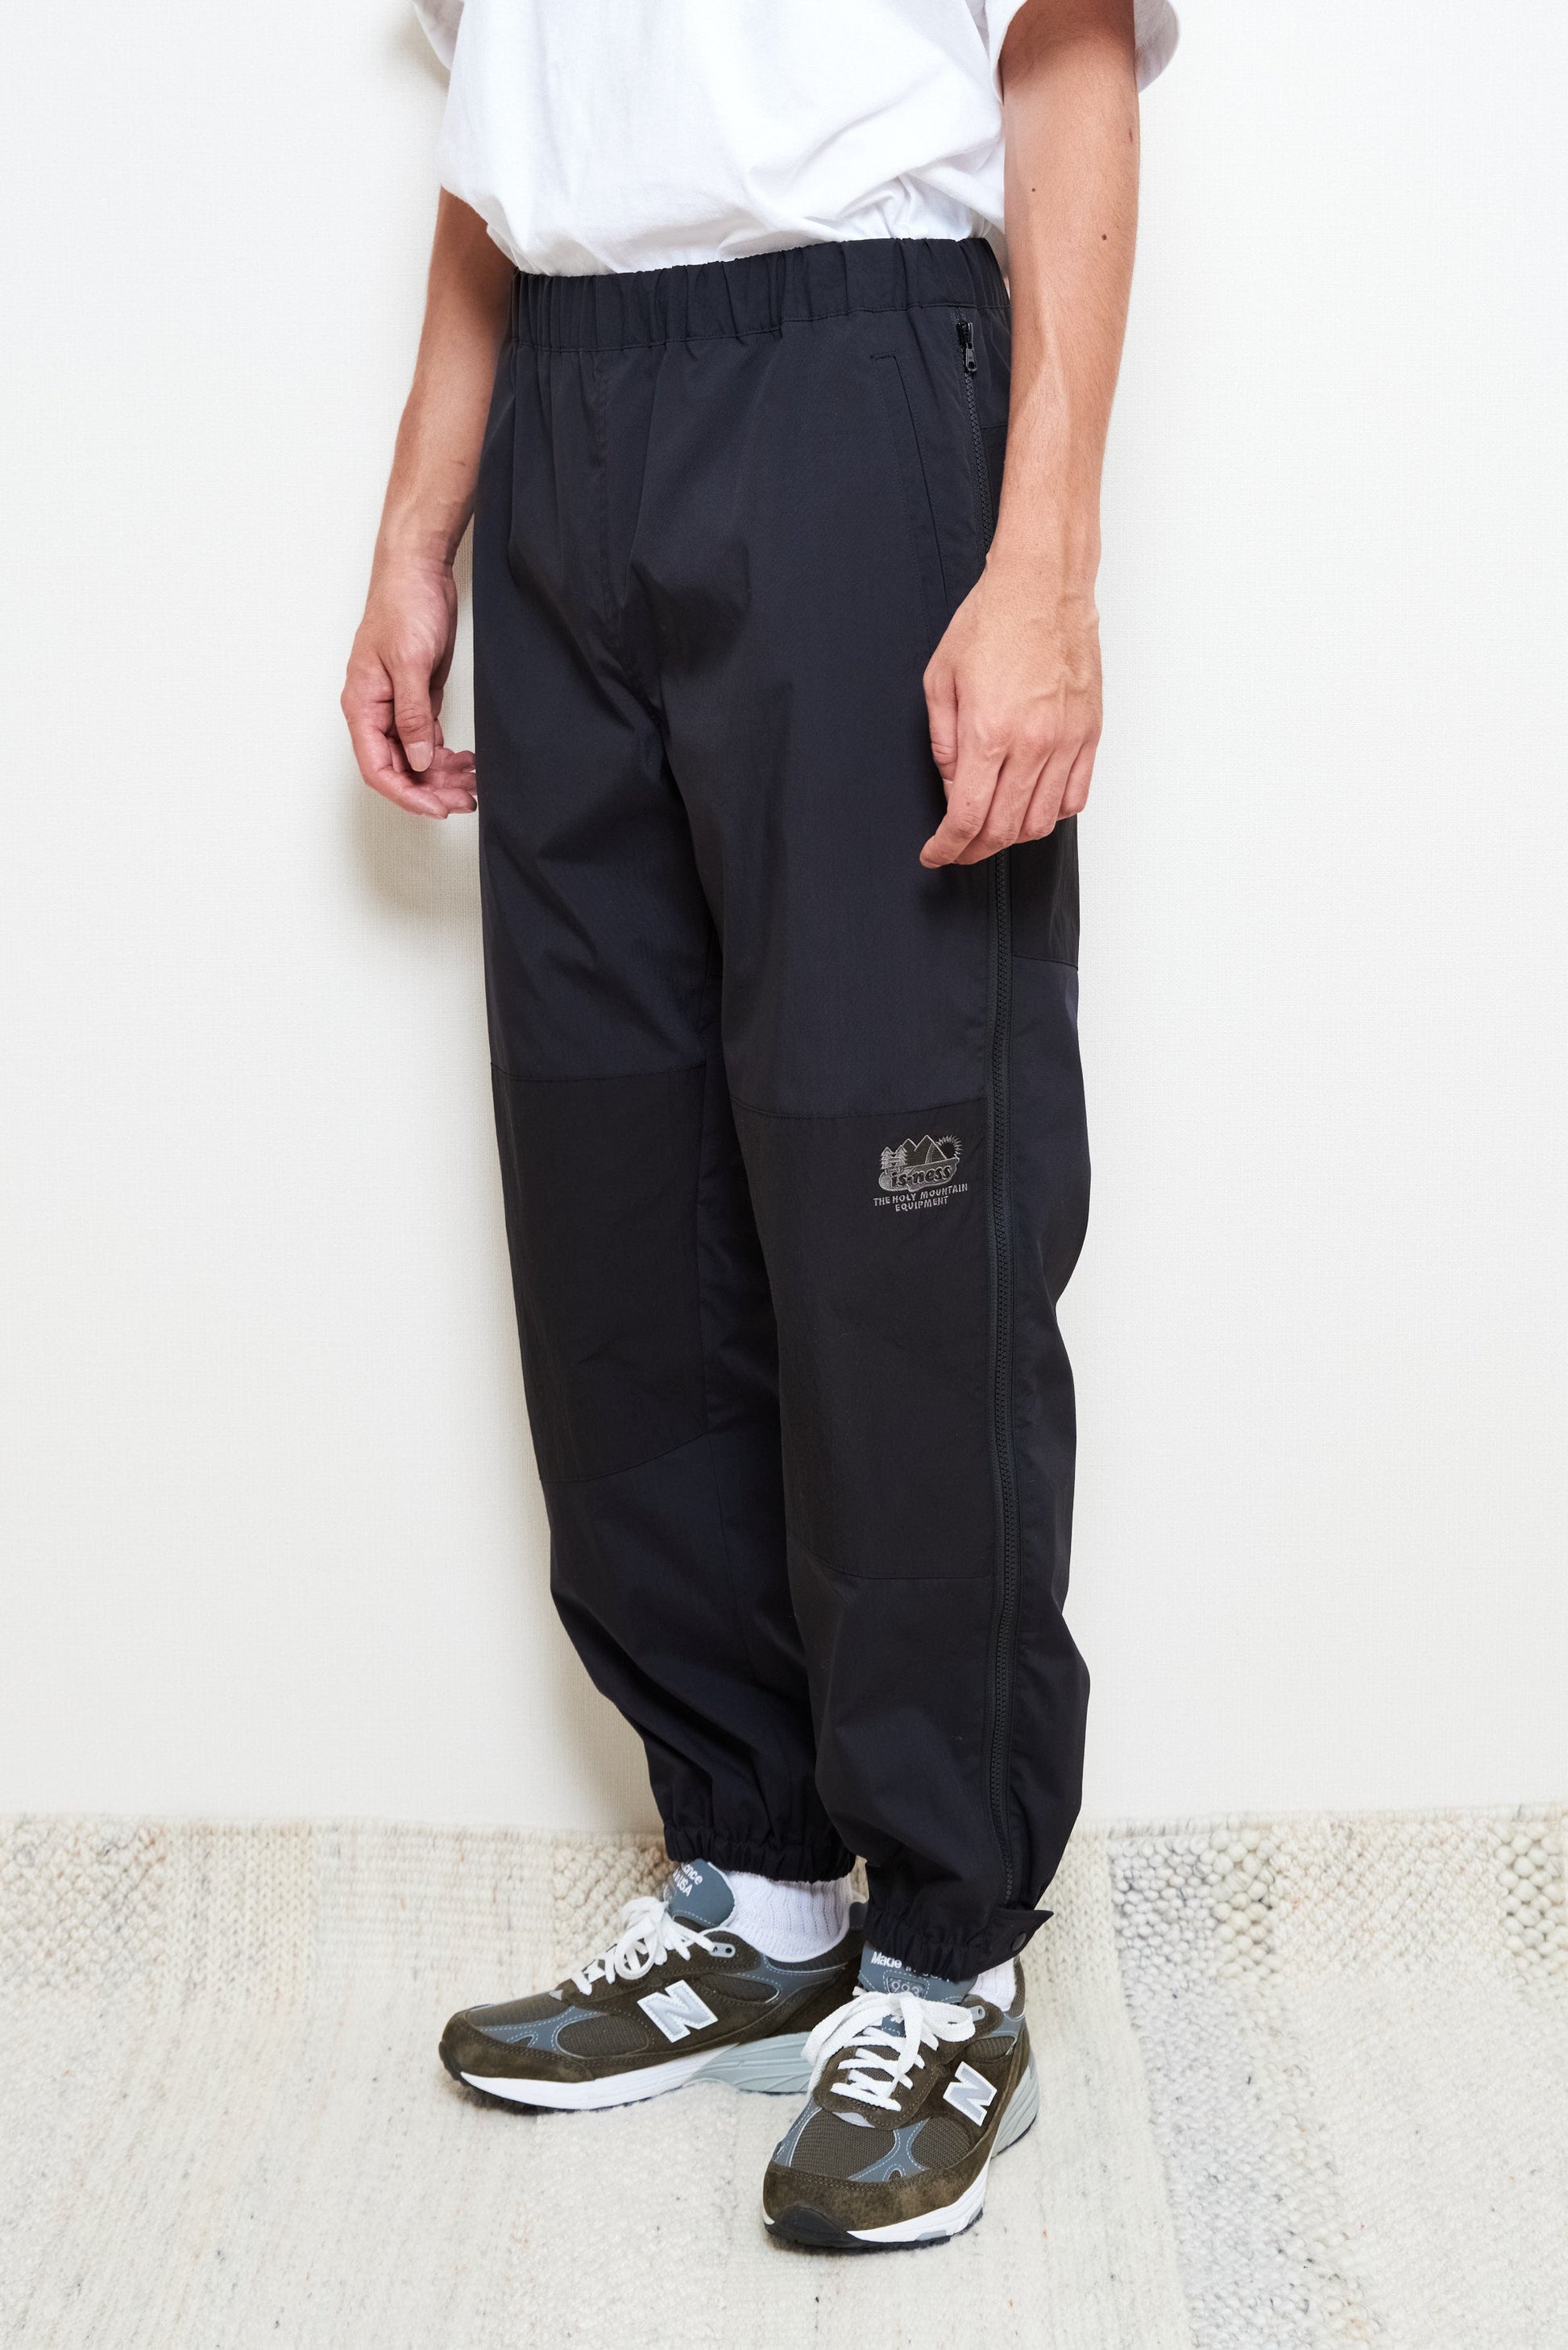 THE HOLY MOUNTAIN VENTILATION PANTS is-ness online shop 8